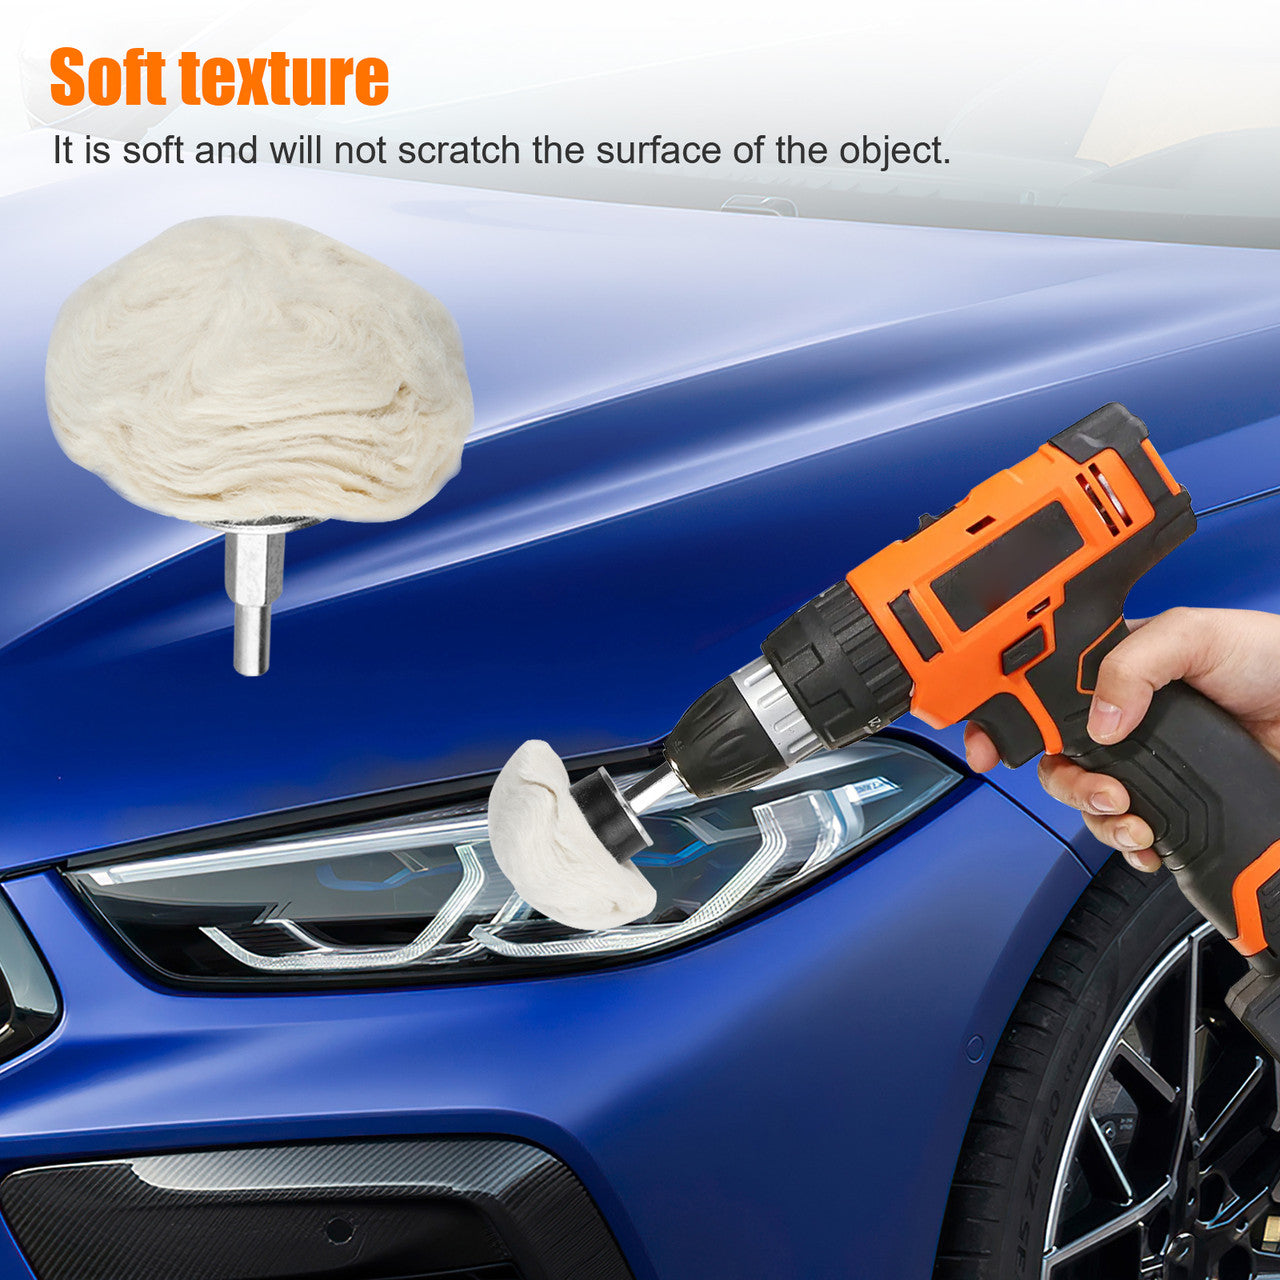 Polishing Buffing Pads Mop Wheel Buffer Pad Drill Kit for Cleaning the House or Car, 15Pcs